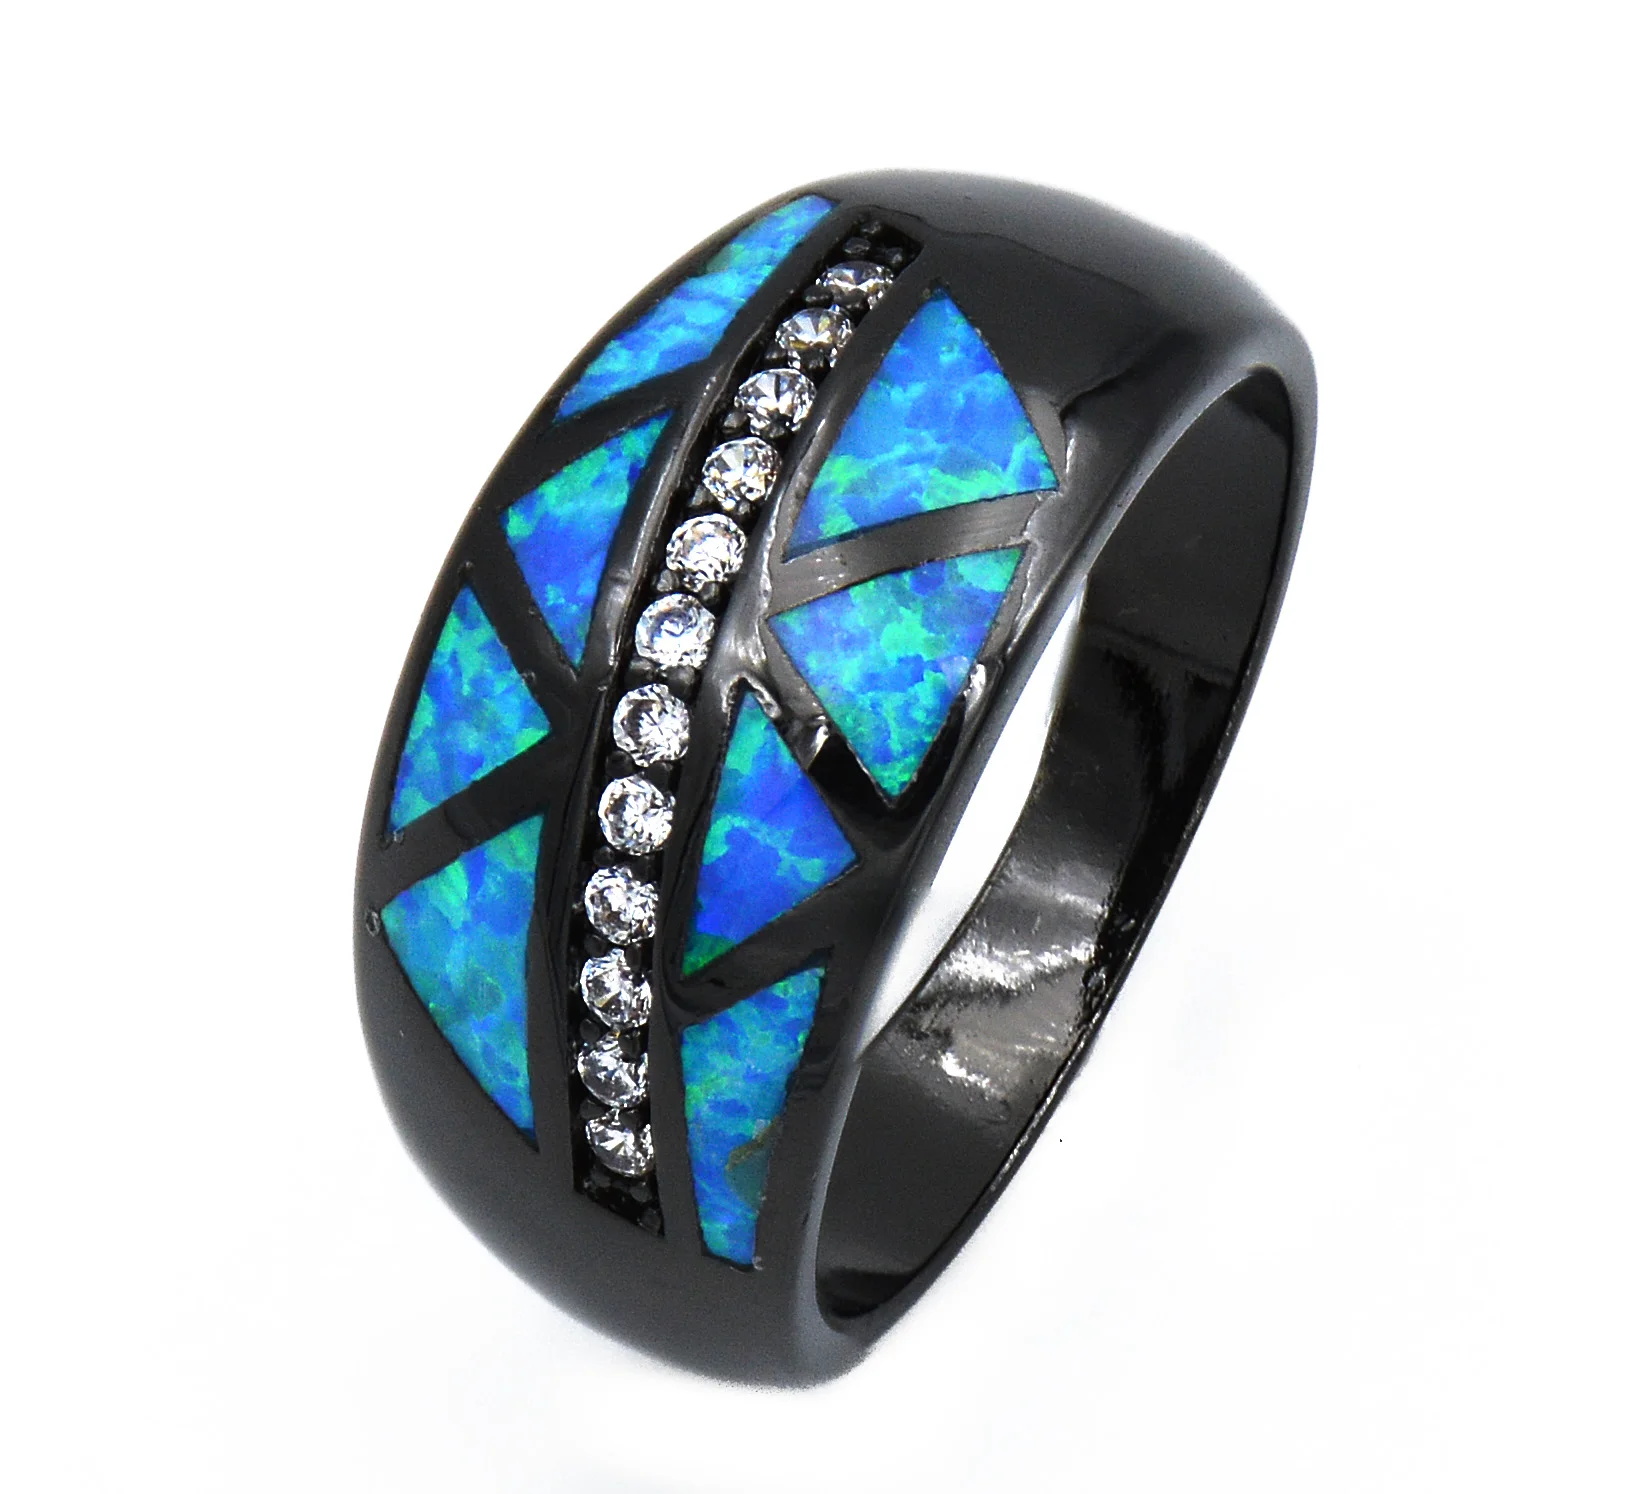 

JLR-588 New Arrival Real Black Gold Filled Blue Fire Opal Rings for Men Women Hot Sale Opal Jewelry Wedding Unique Cocktail Ring